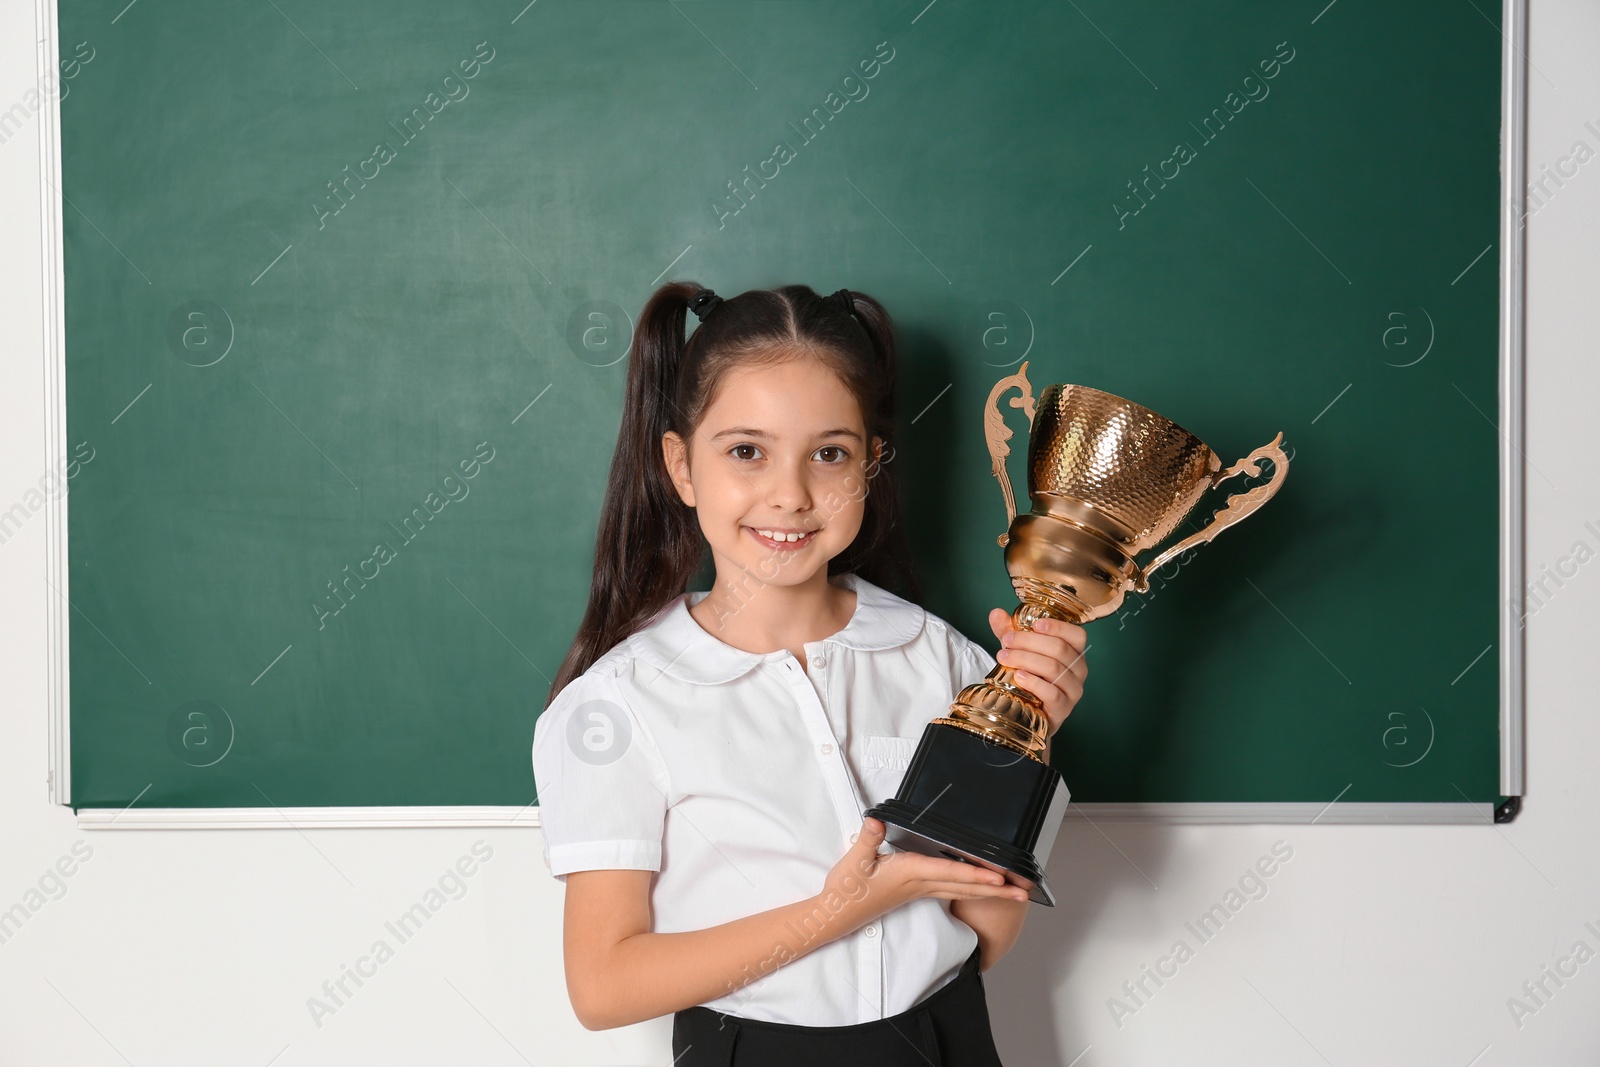 Photo of Happy girl with golden winning cup near chalkboard in classroom